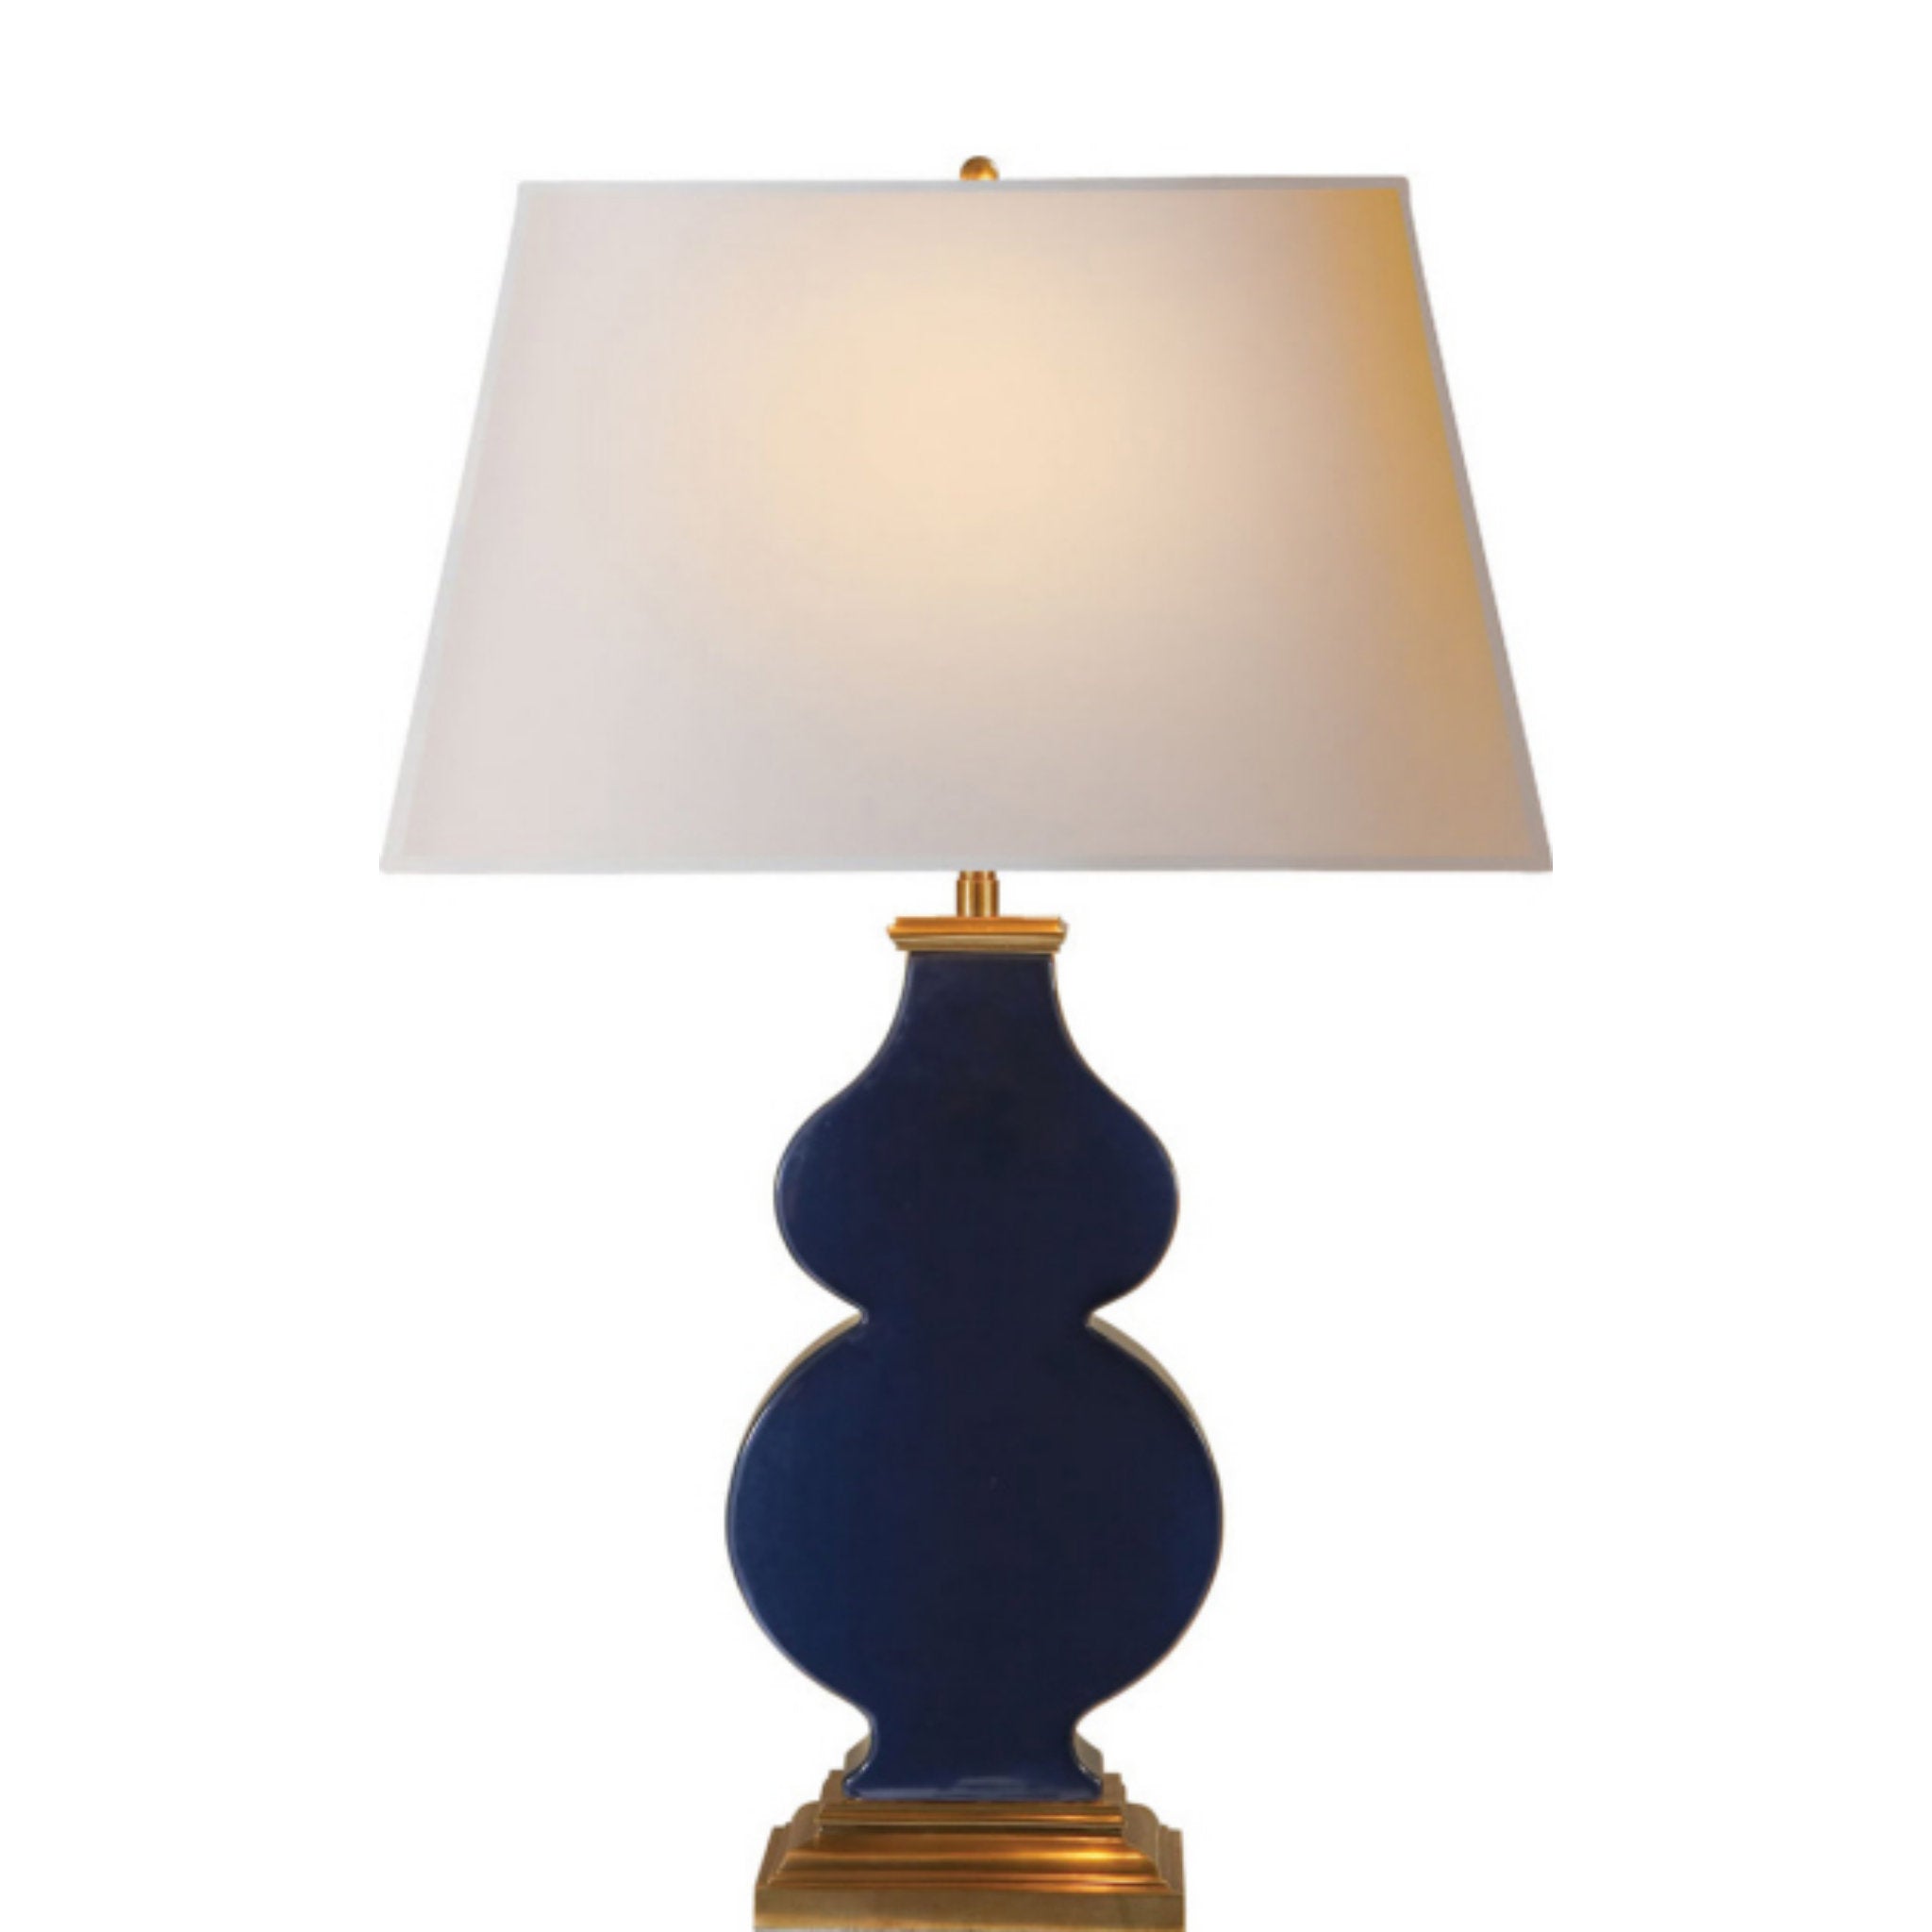 Alexa Hampton Anita Table Lamp in Midnight Blue Porcelain with Natural Paper Shade